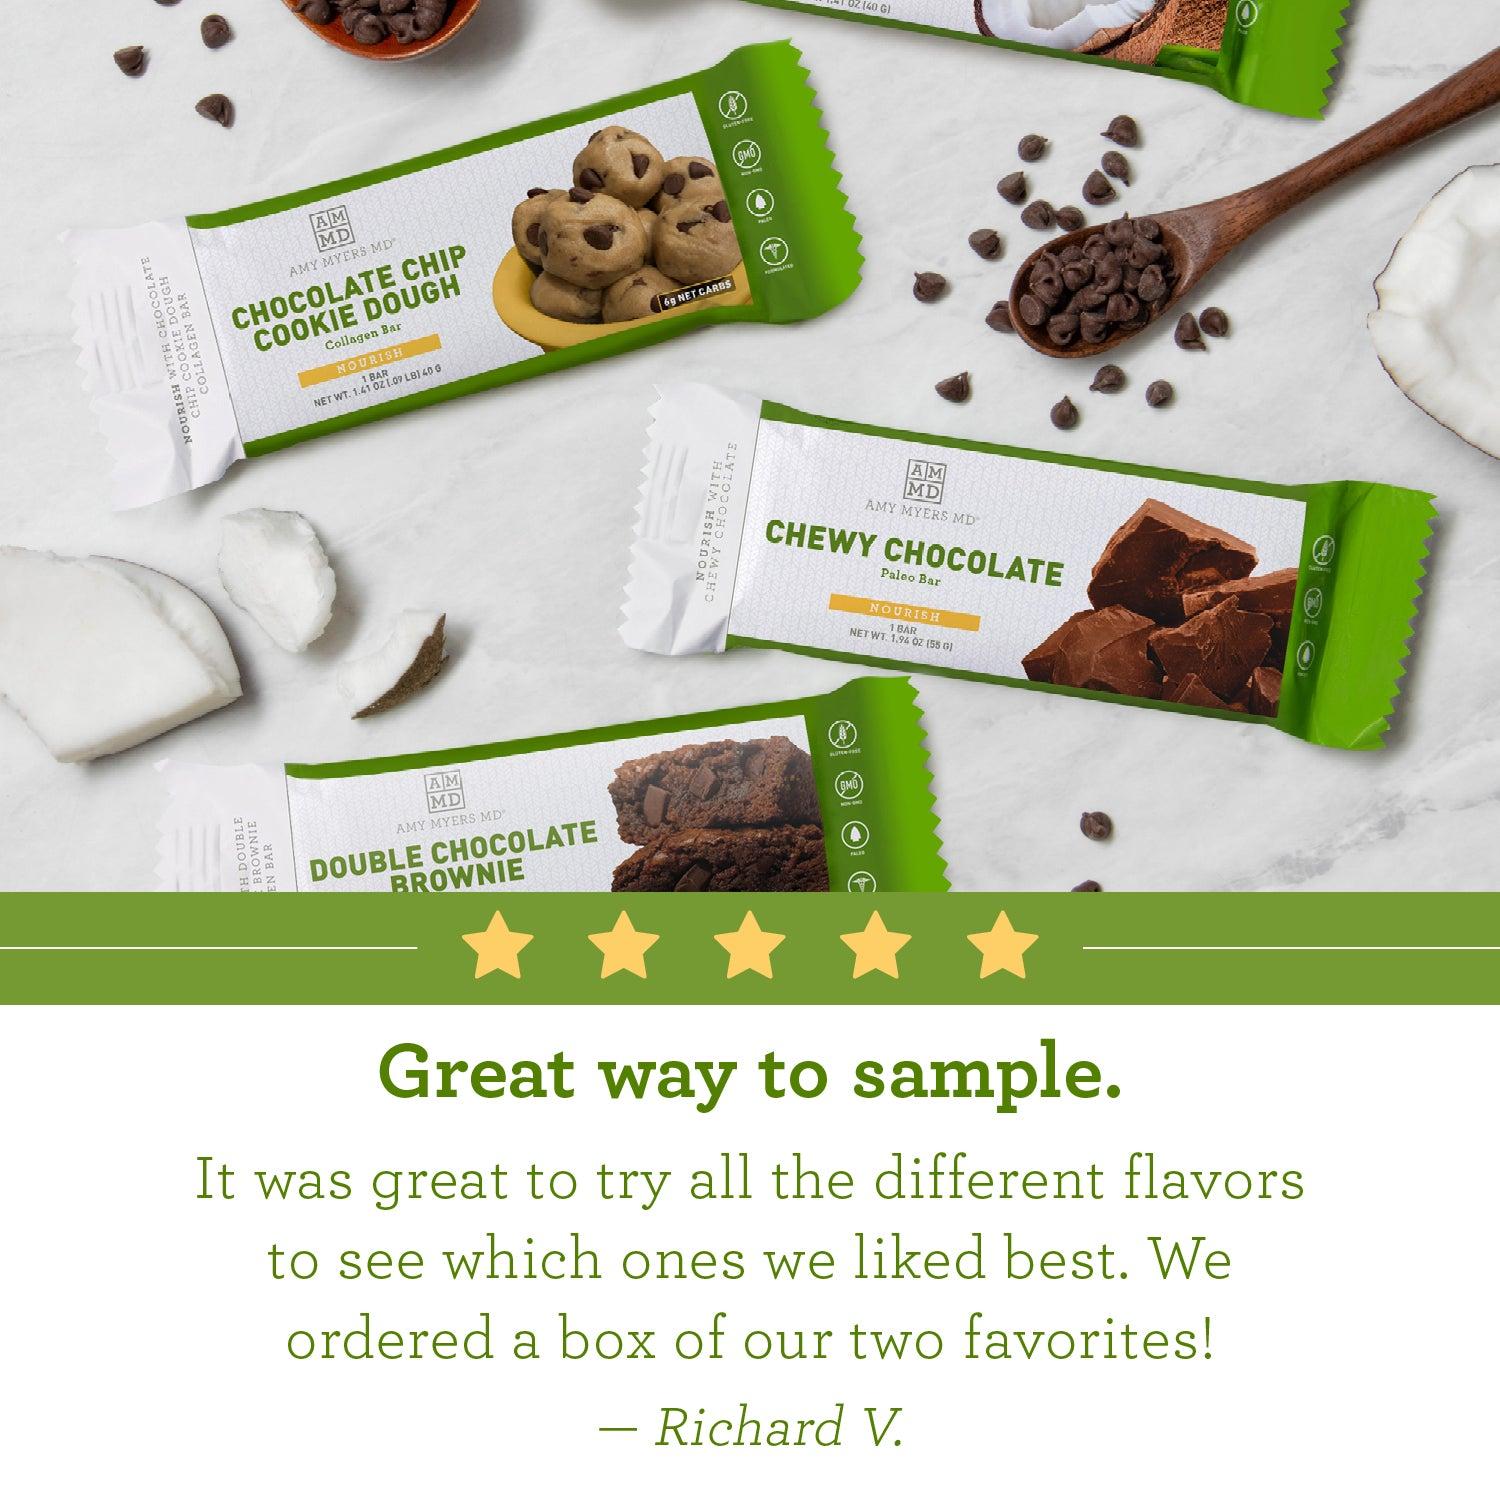 Top half of the image features 4 Bar Sampler Pack sitting on a kitchen counter. A green banner with 5 yellow stars runs across the center of the image. The bottom half contains the following review: “Great Way to Sample. It was great to try all the different flavors to see which ones we liked best. We ordered a box of our two favorites! - Richard V.”